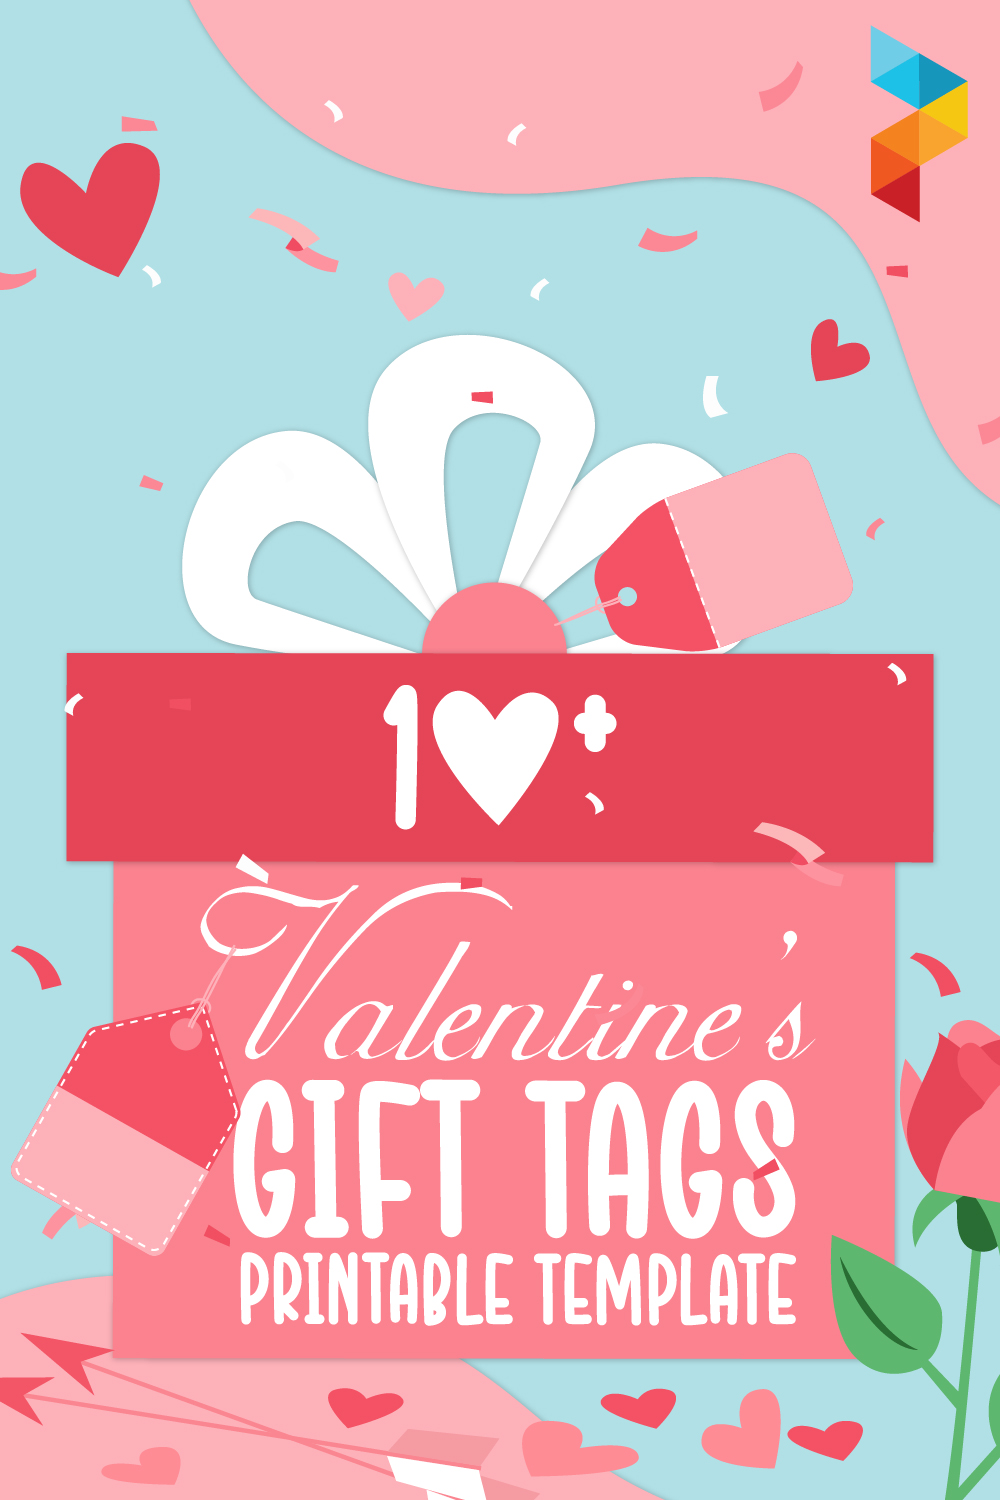 Valentine's Gift Tags Printable Template